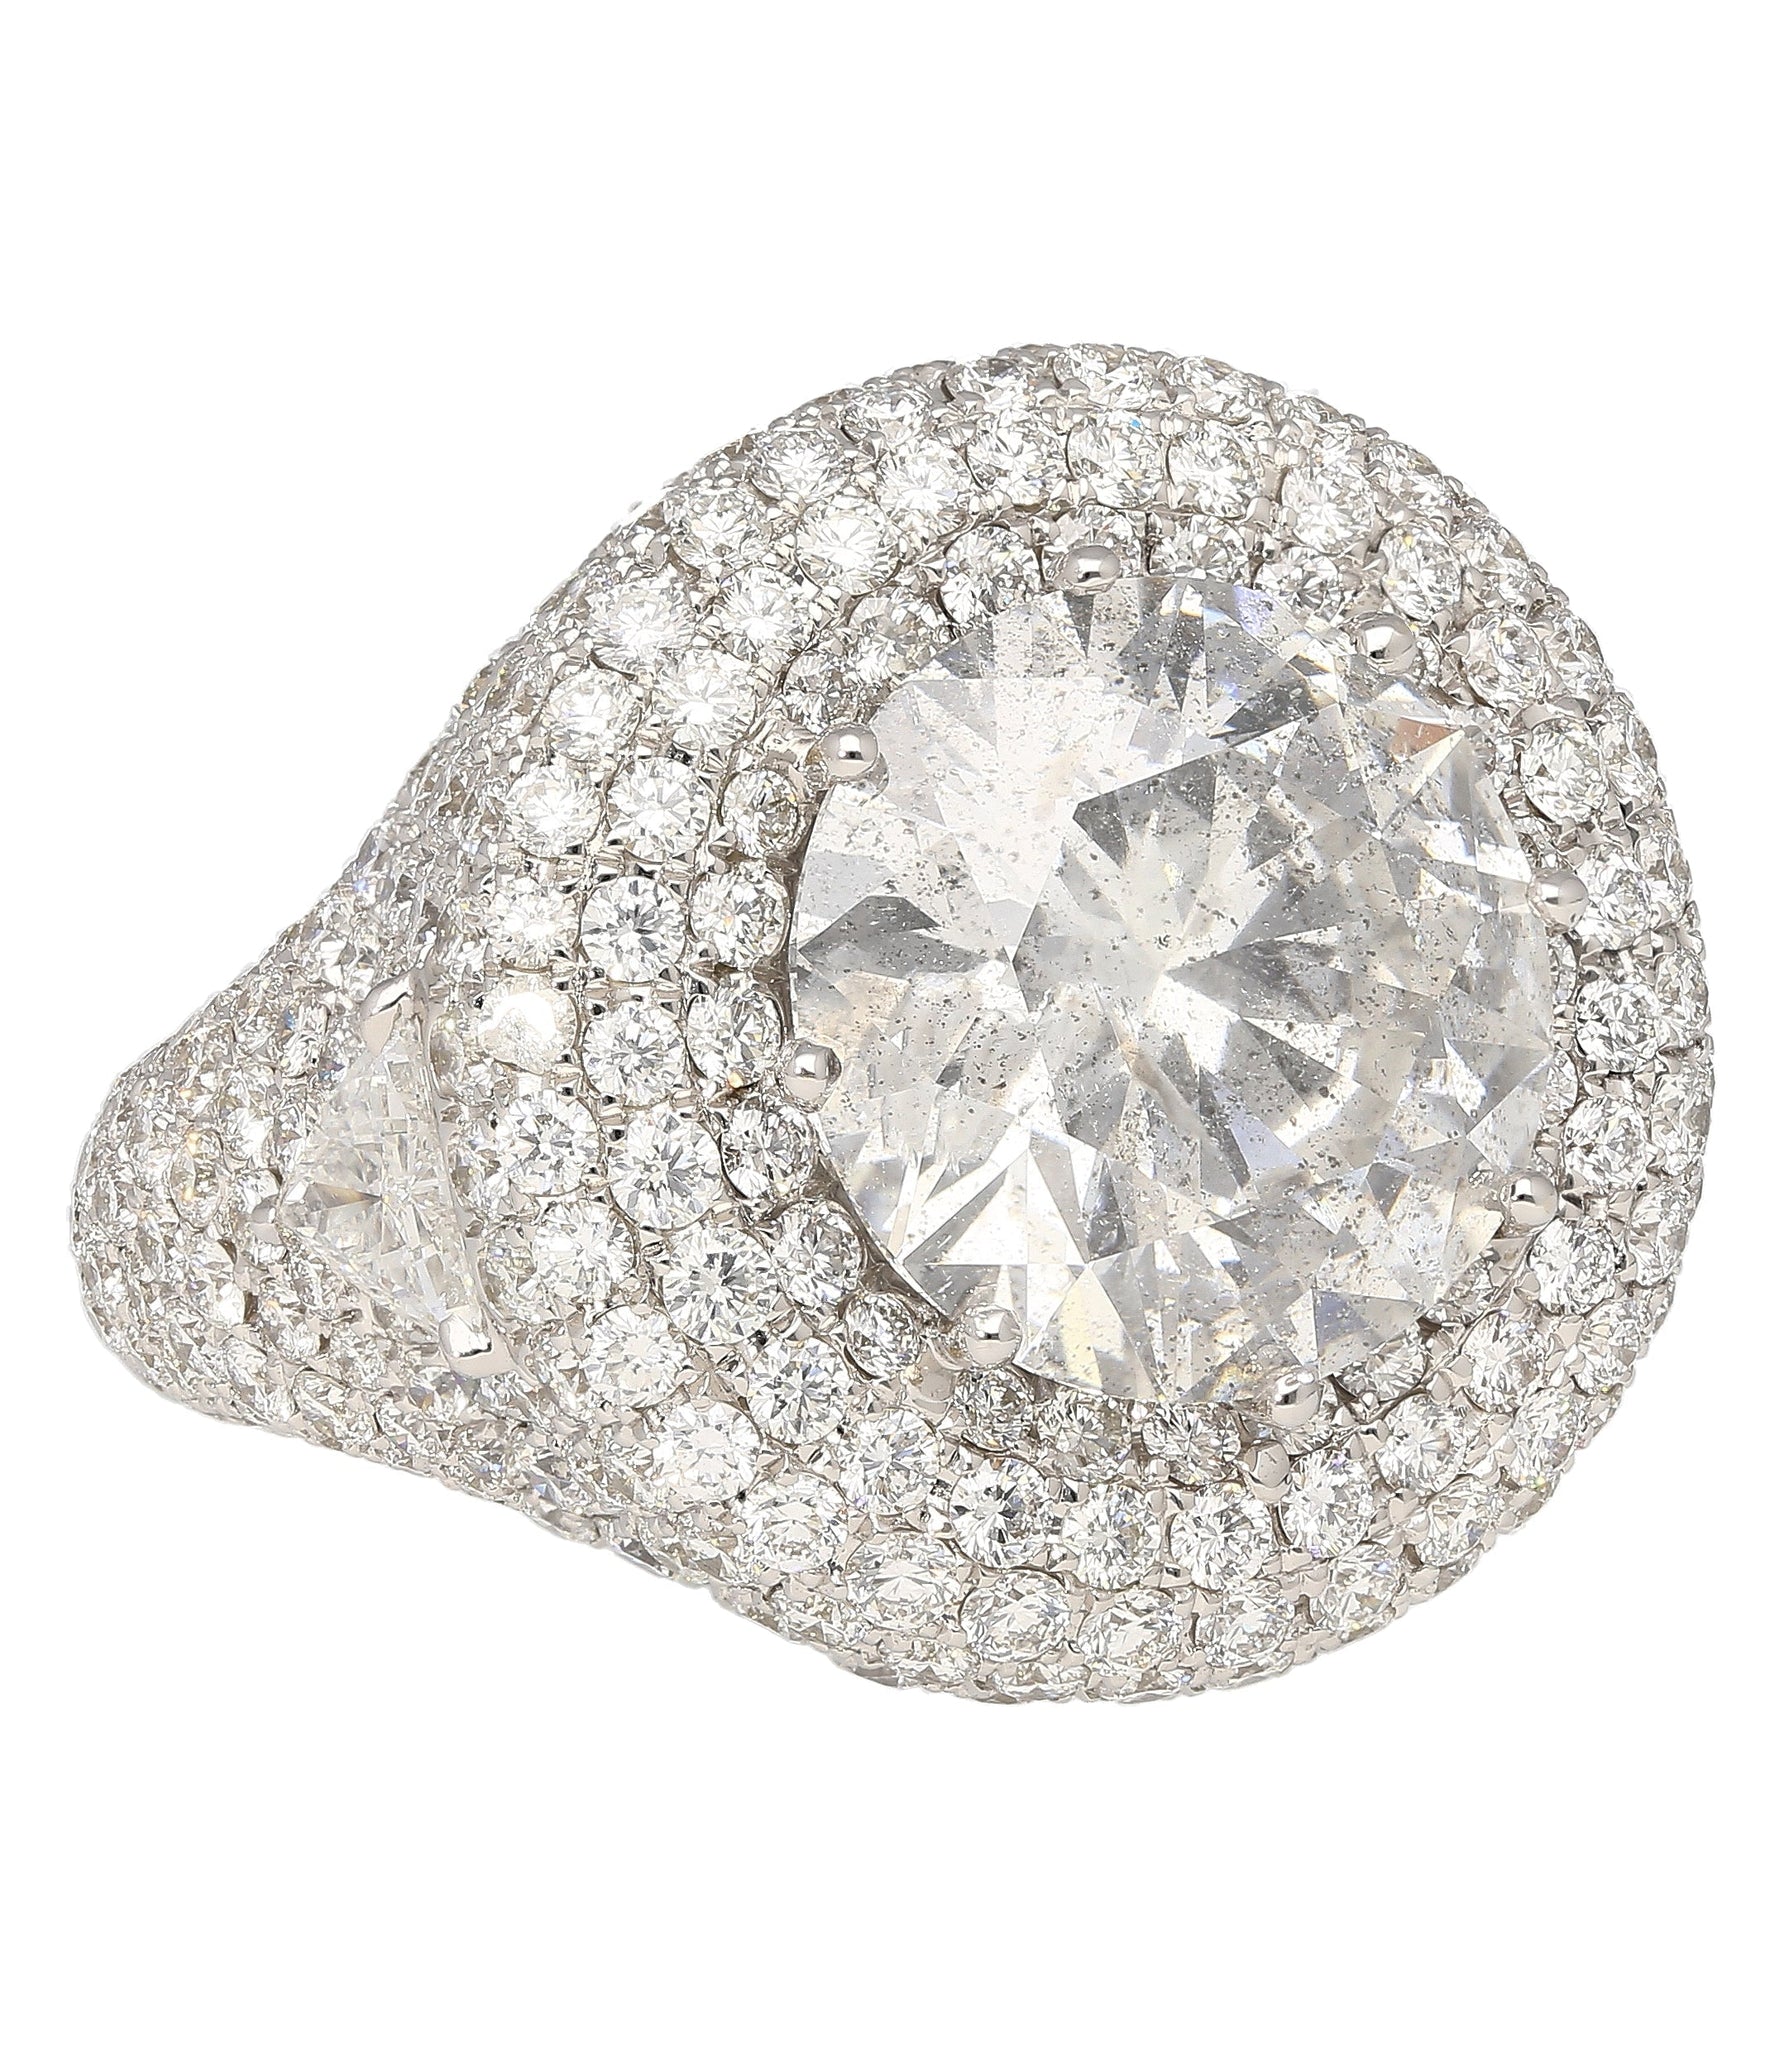 7.71 Carat Round Cut I2 Natural Diamond Cluster Ring in 18K White Gold